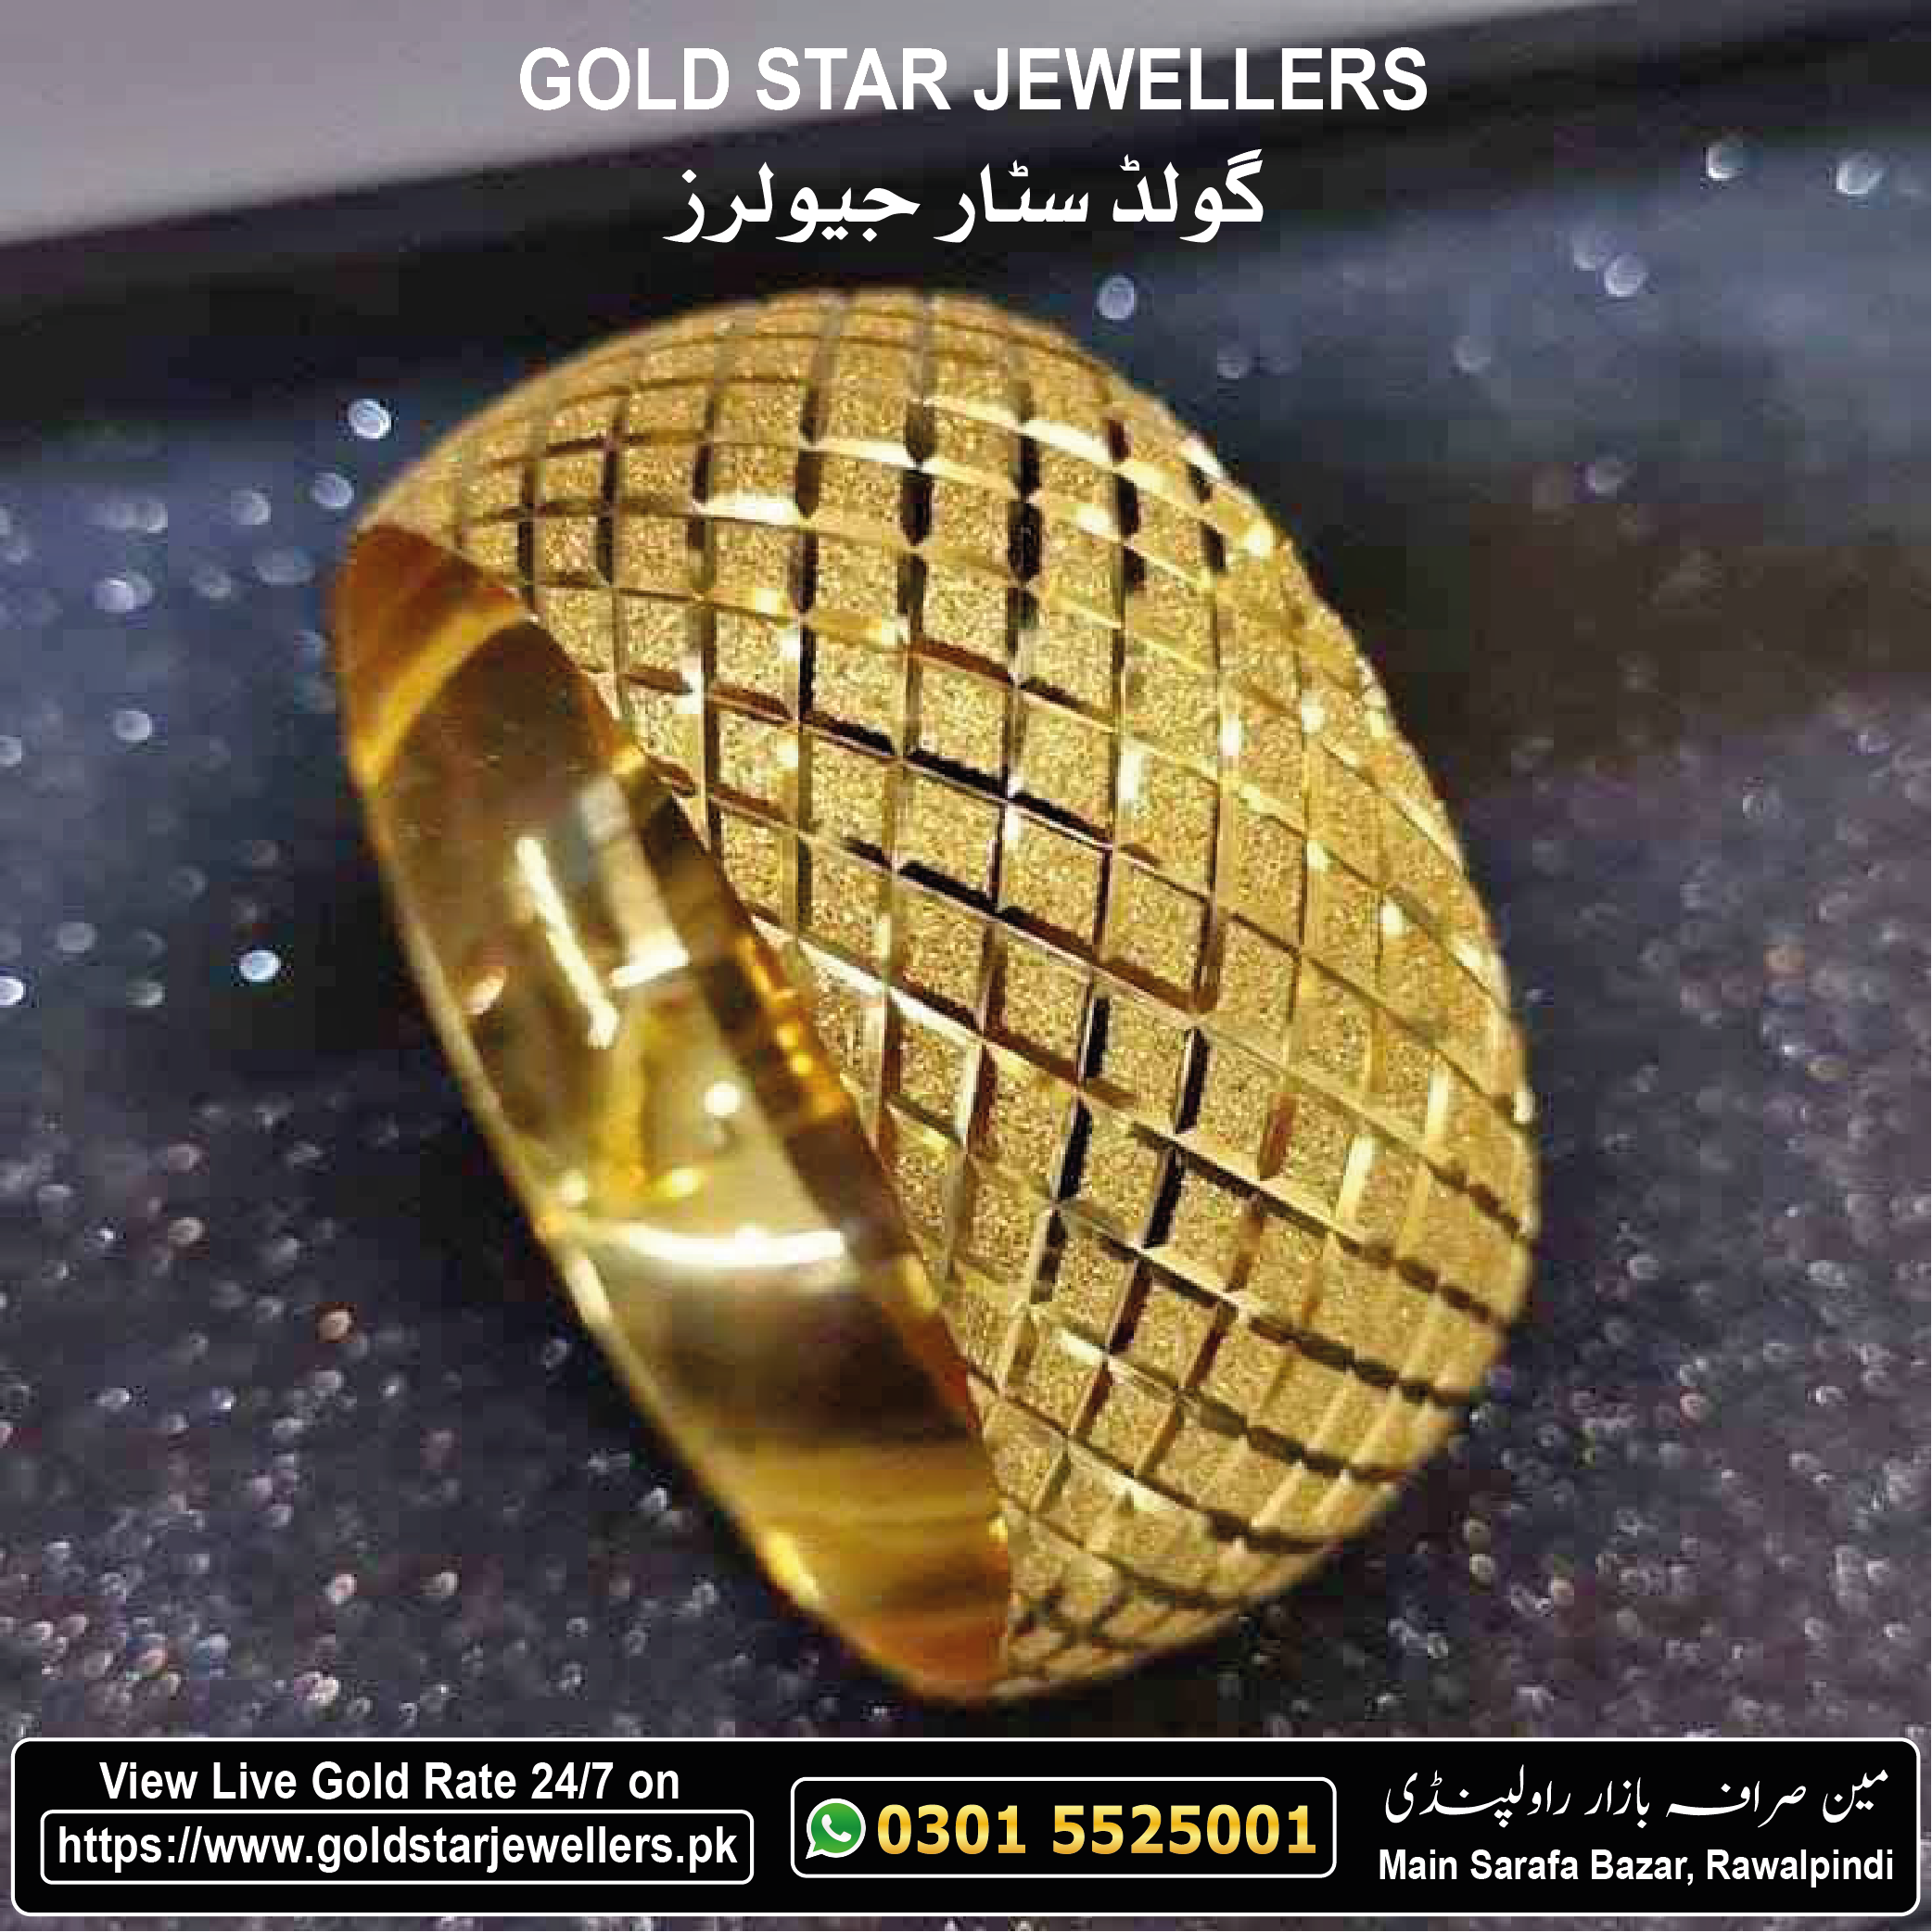 Four Leaf Blossom Yellow Gold Ring | SEHGAL GOLD ORNAMENTS PVT. LTD.